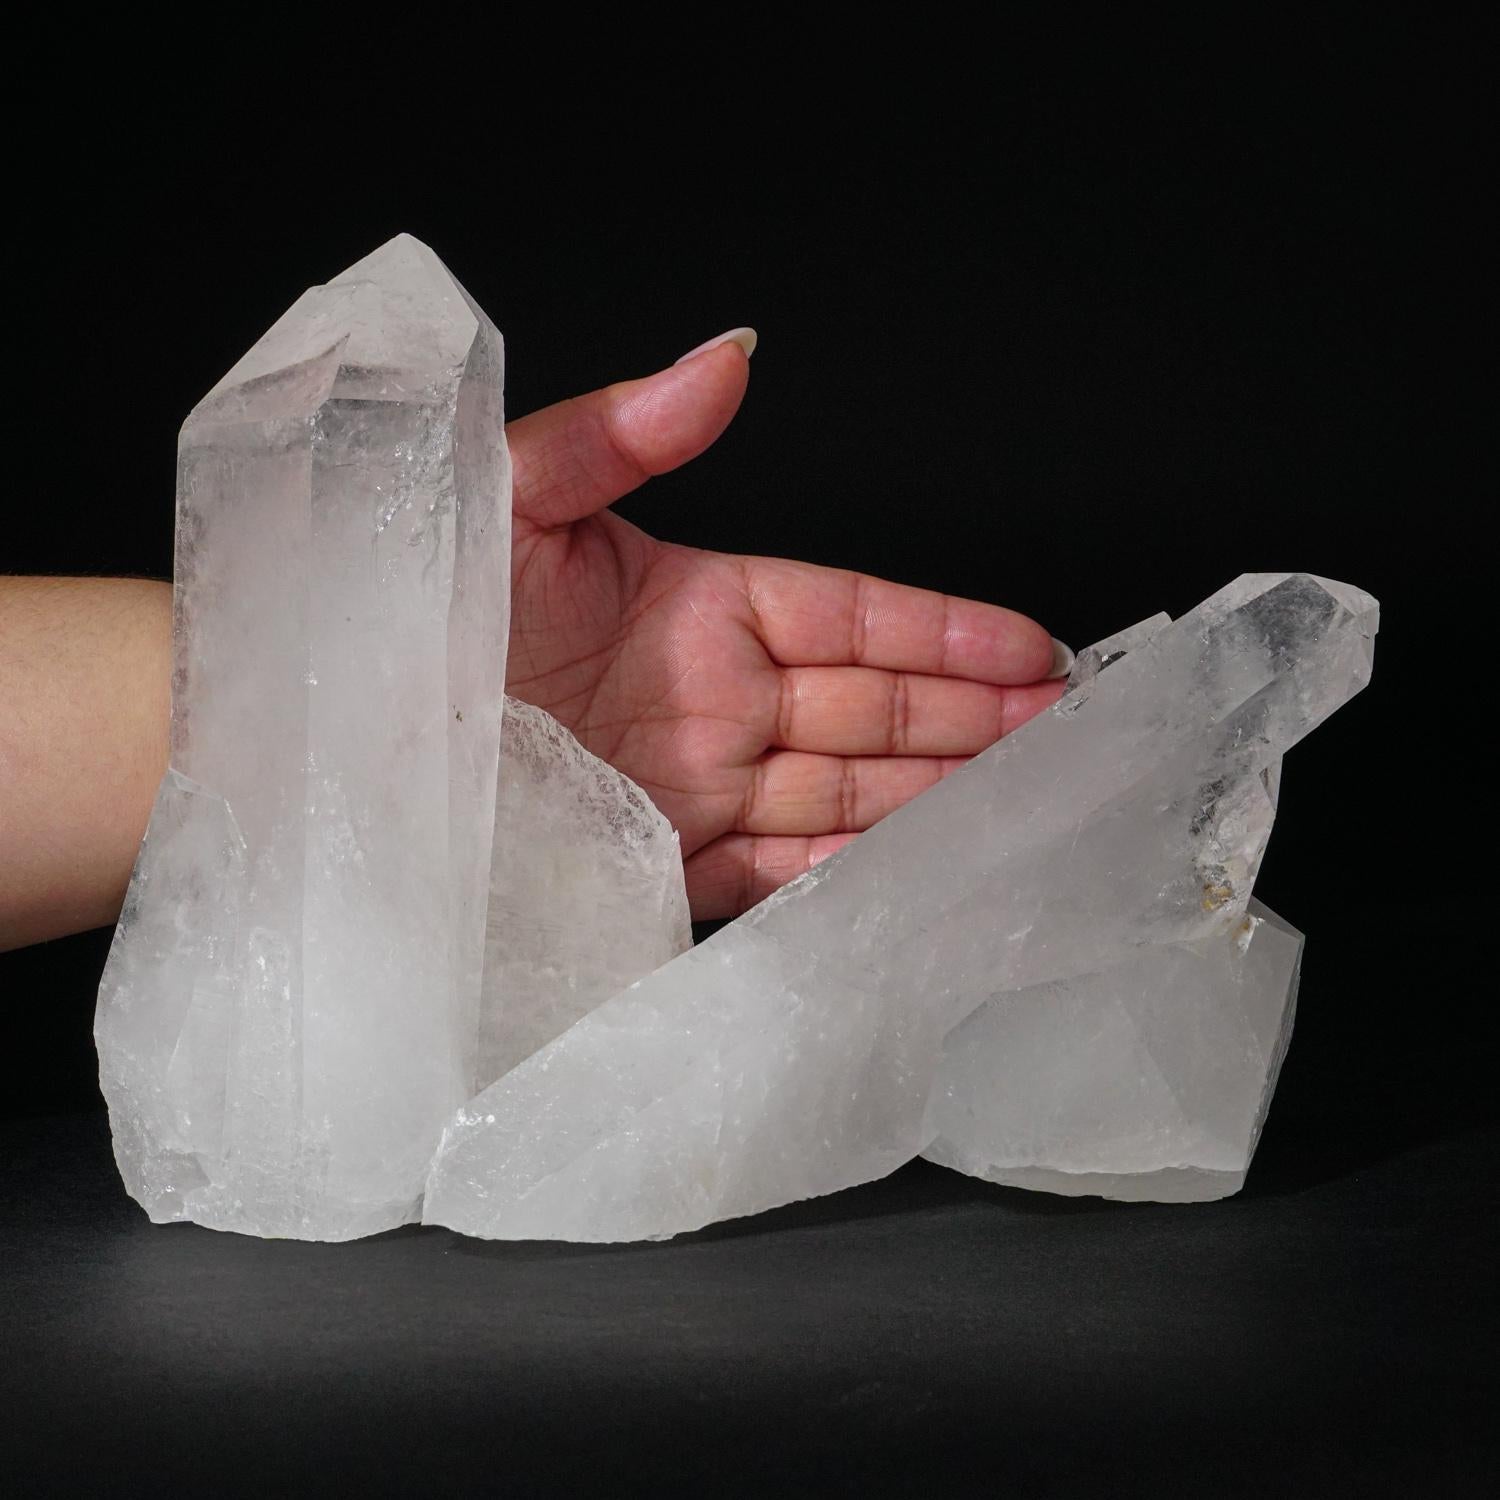 High quality Brazilian Quartz point Crystal Cluster. This translucent crystal cluster has fully terminated quartz point crystals with lustrous highly reflective faces. 

Clear Quartz encourages clarity of thought and purpose to one’s heart and mind.